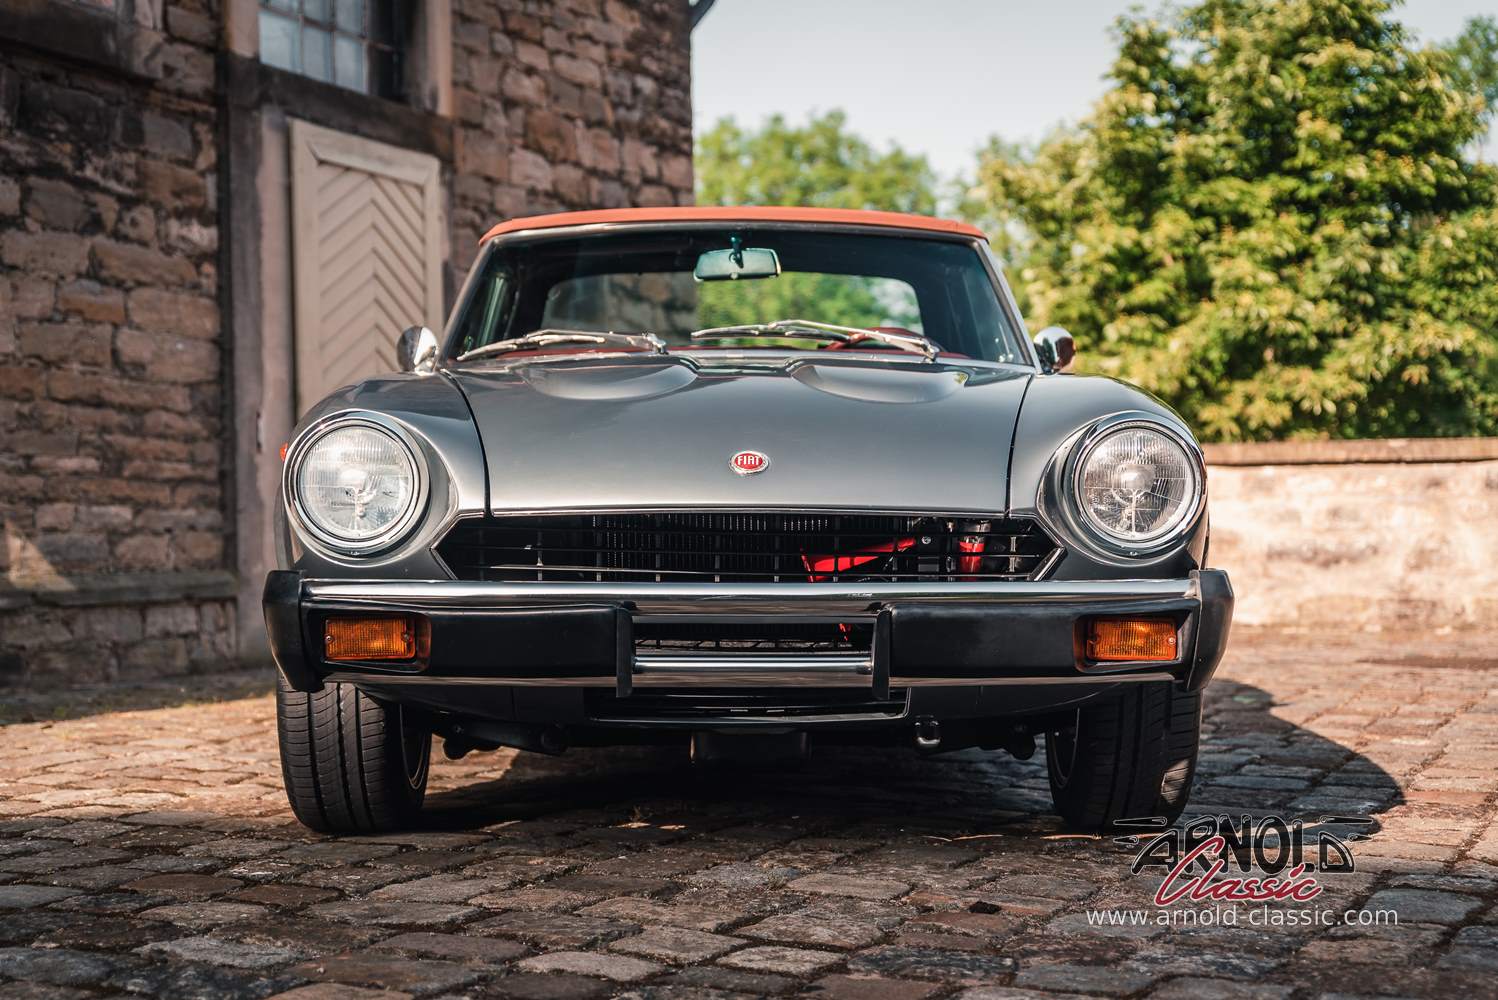 Buy your dream Fiat 124 Spider | Arnold Classic GmbH